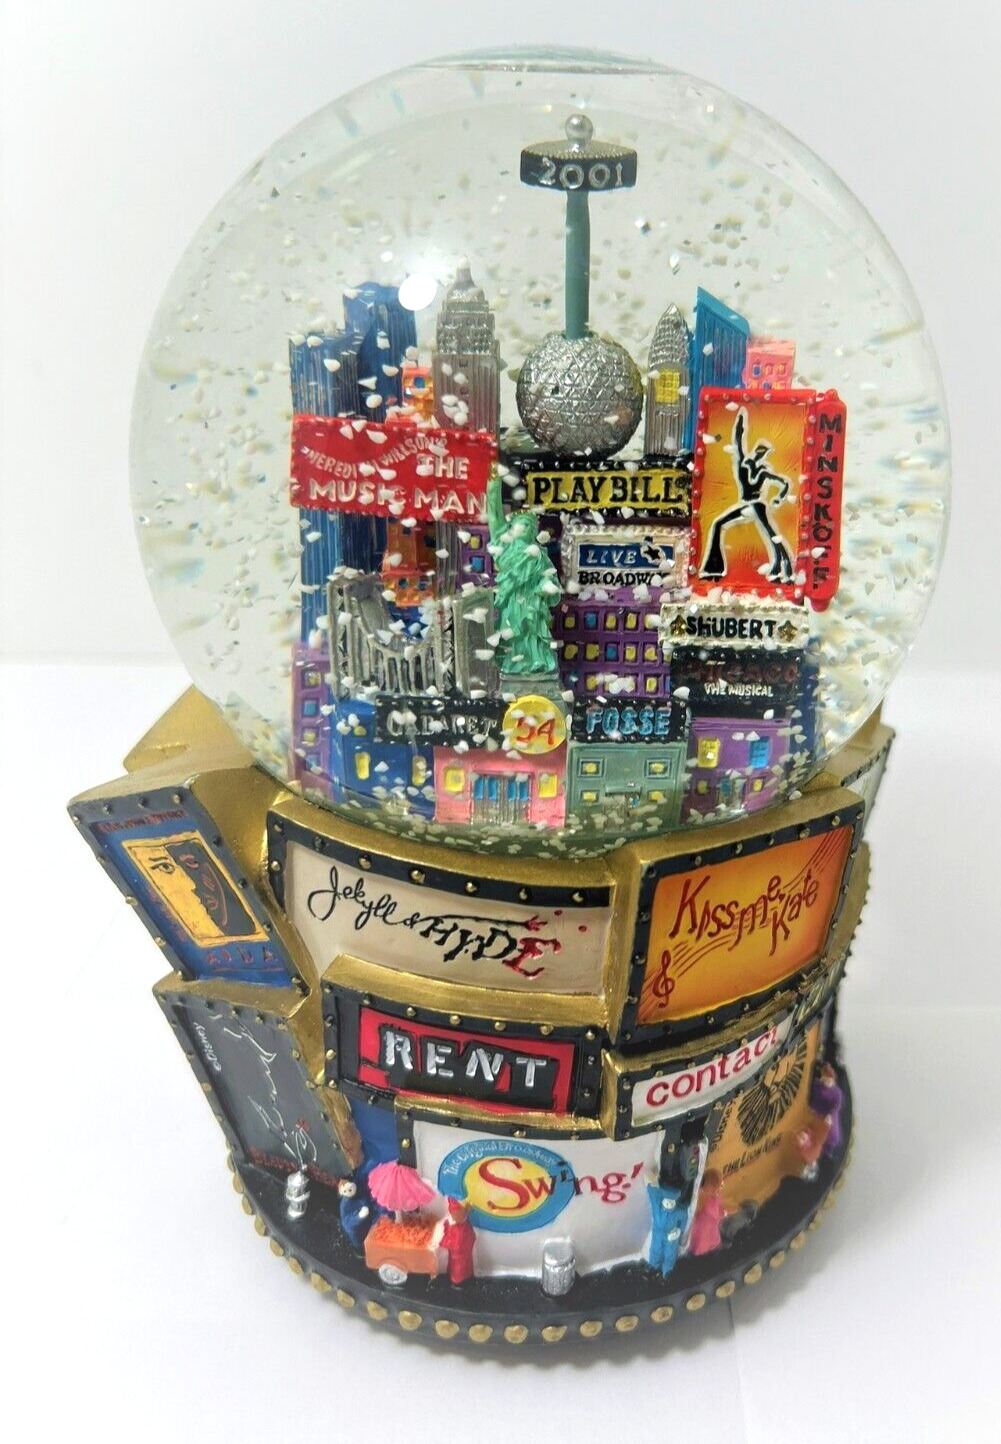 Bloomingdales Broadway Musical 2001 Snow Globe - Times Square, WTC Twin Towers